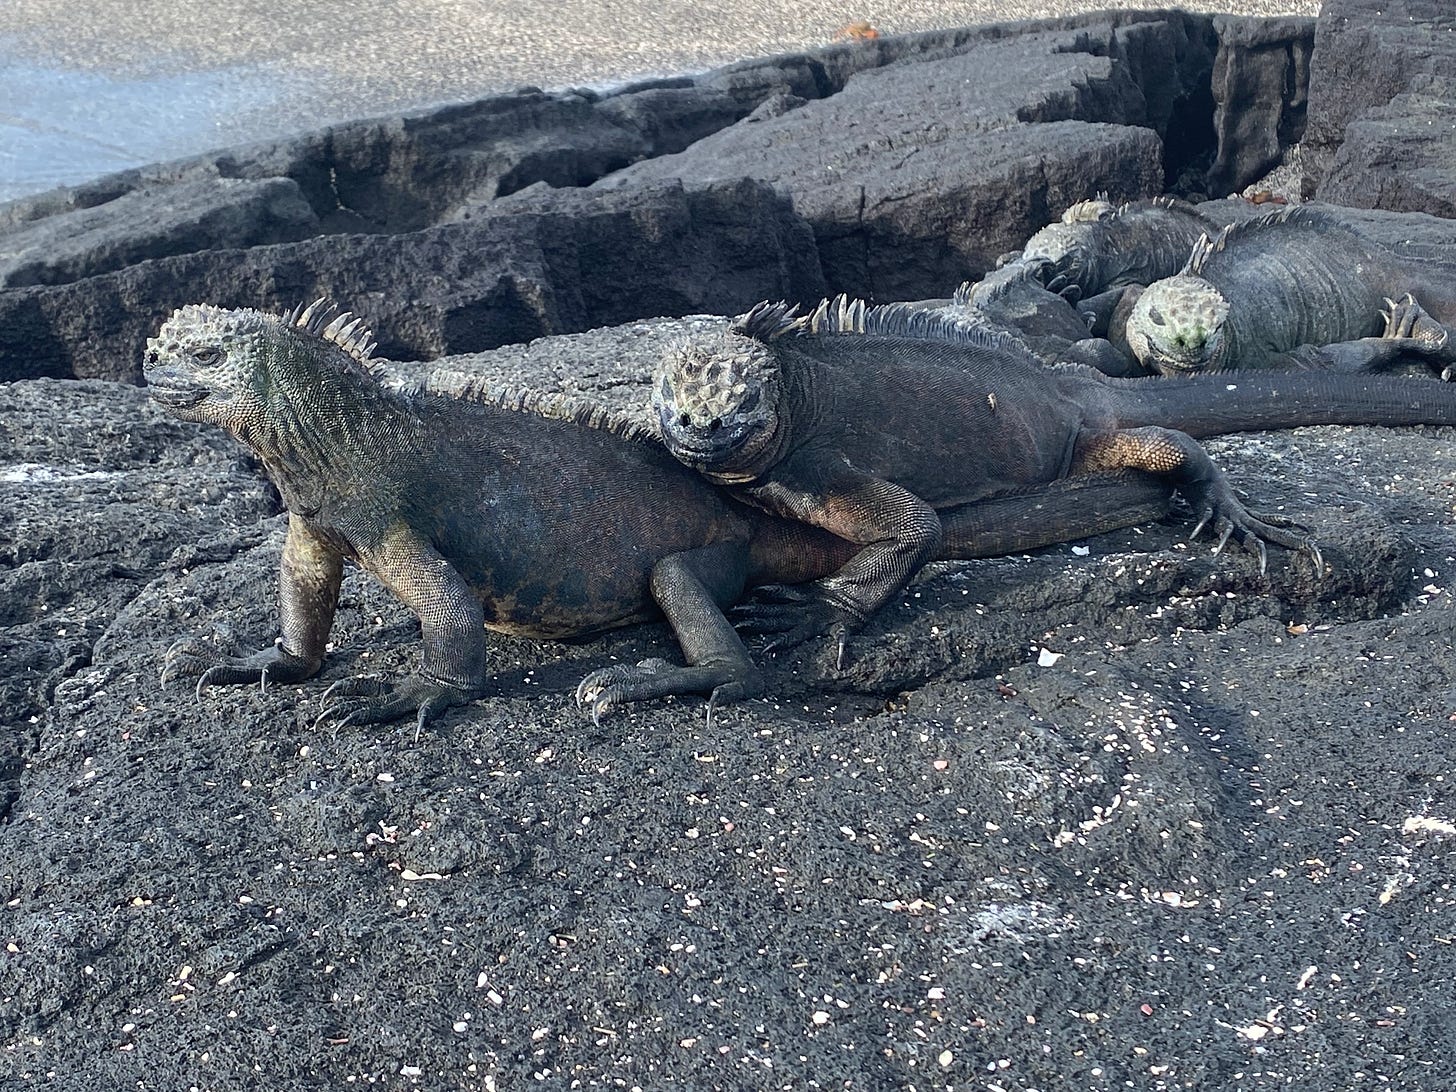 Three marine iguanas piled on top of each other on some flat black lava rocks. Their faces are scaly, spines run down their backs, and their eyes are open and unblinking.